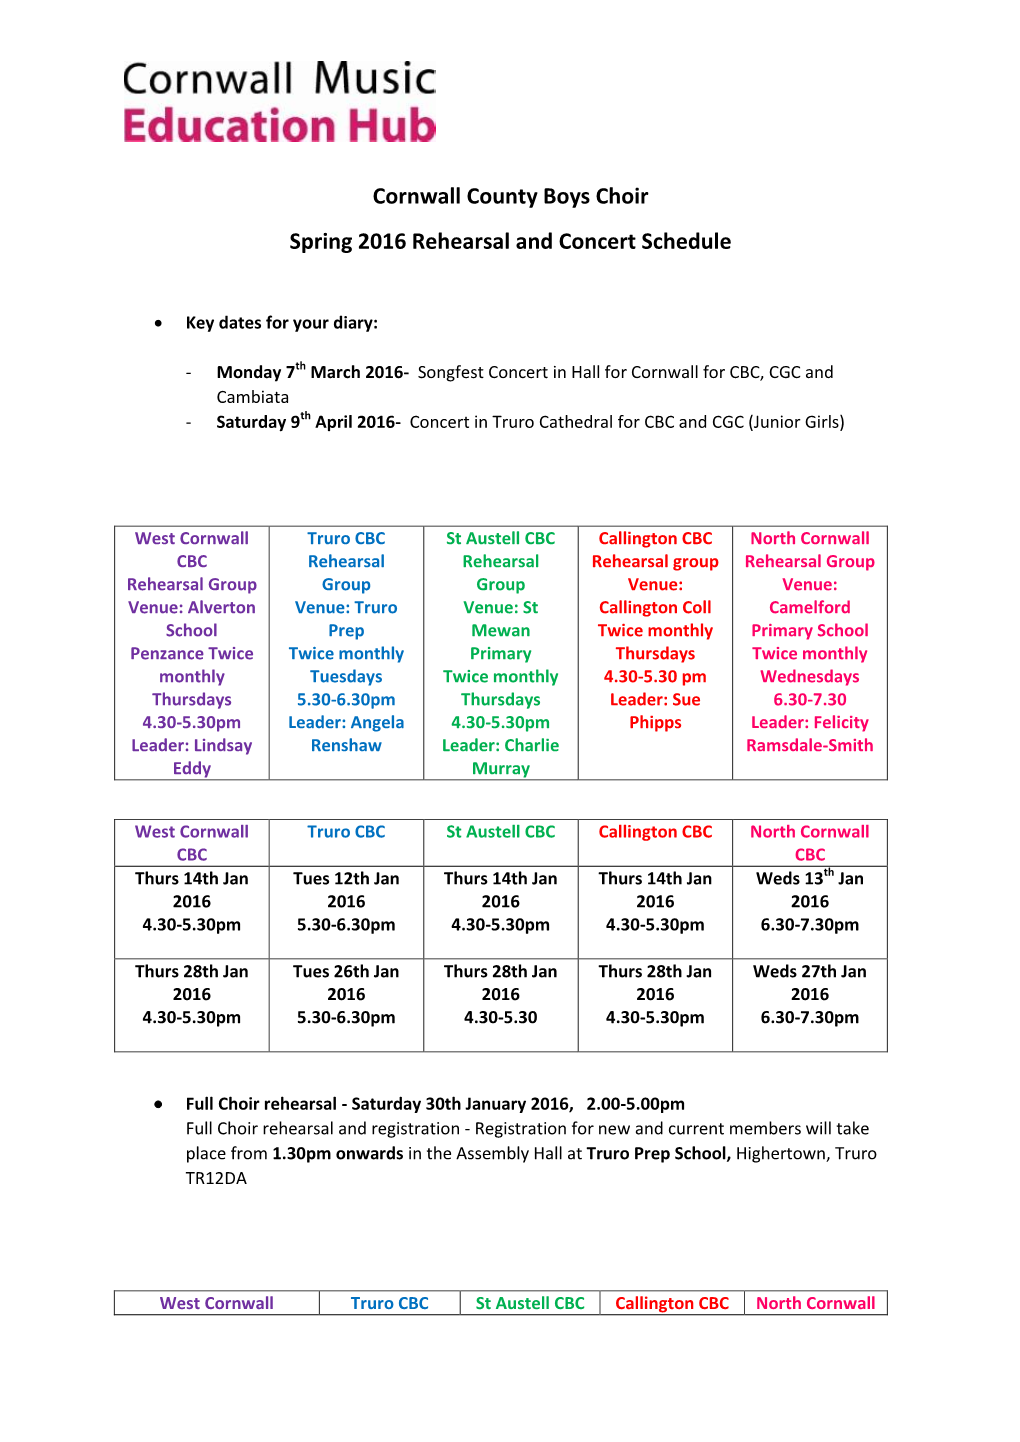 Cornwall County Boys Choir Spring 2016 Rehearsal and Concert Schedule